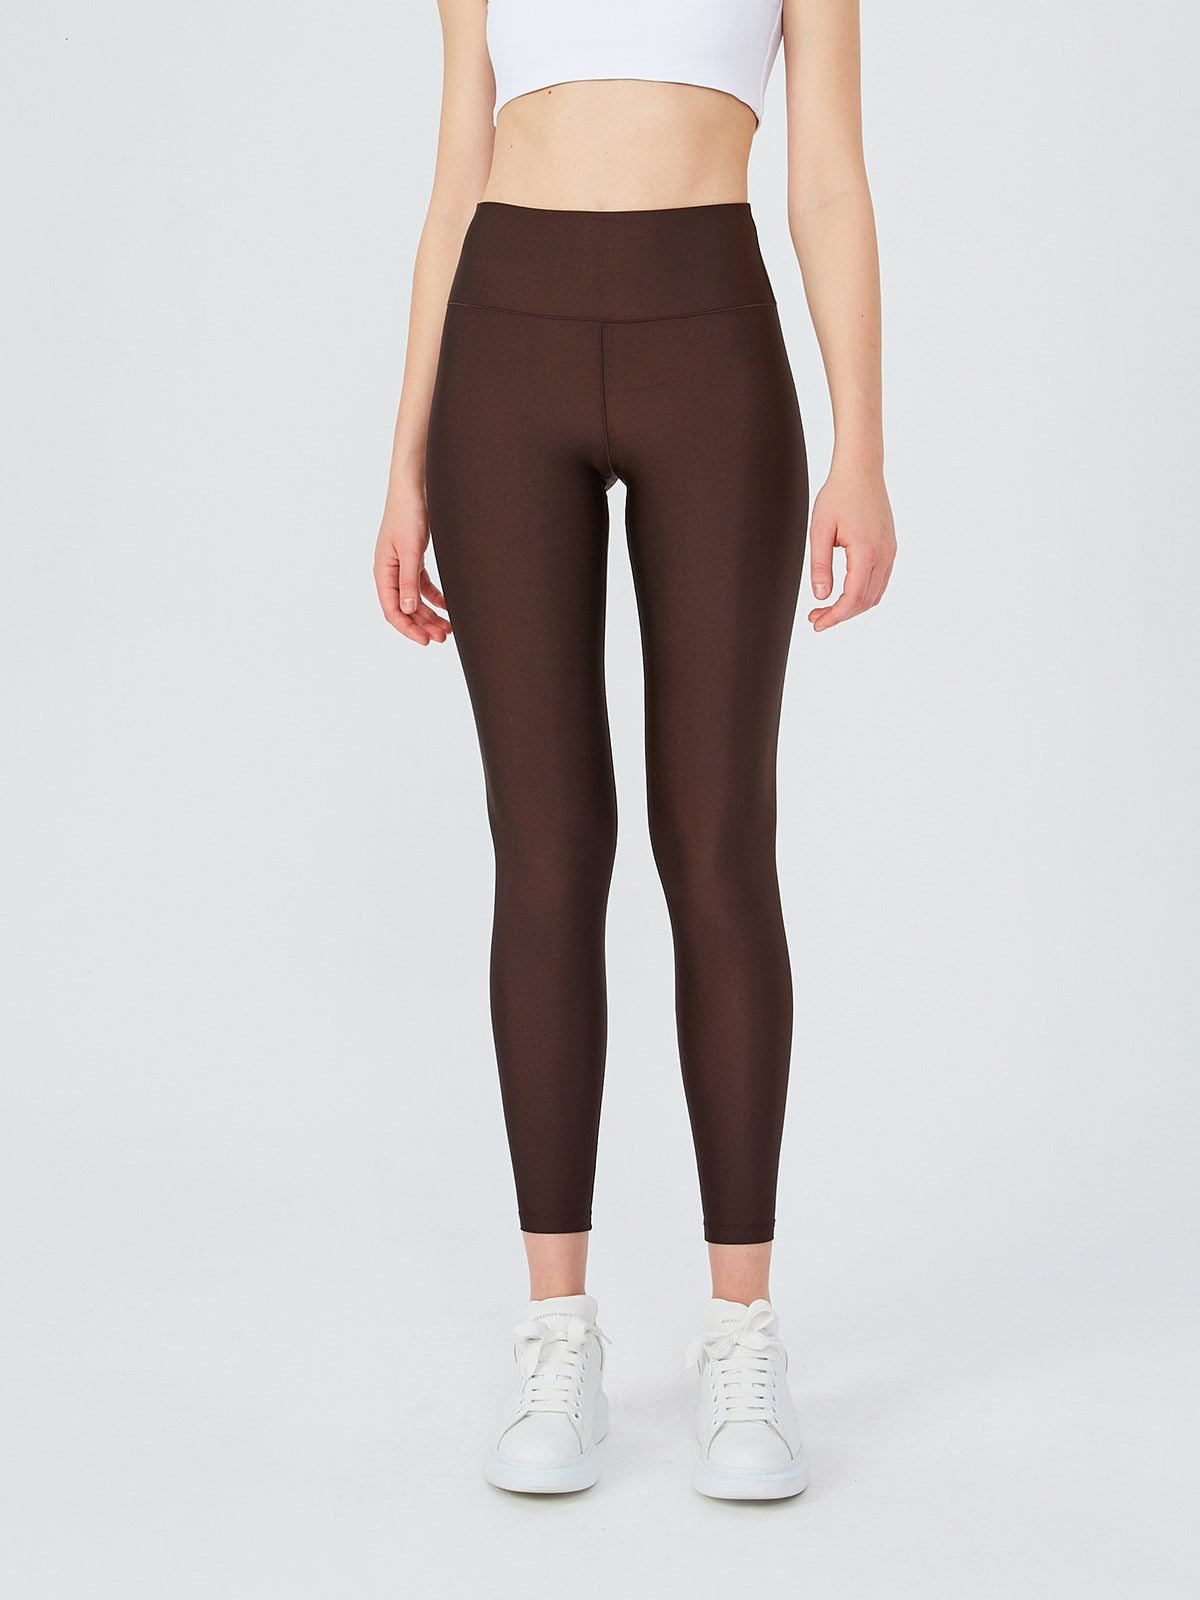 UP&FIT Tayt Glitter Brown